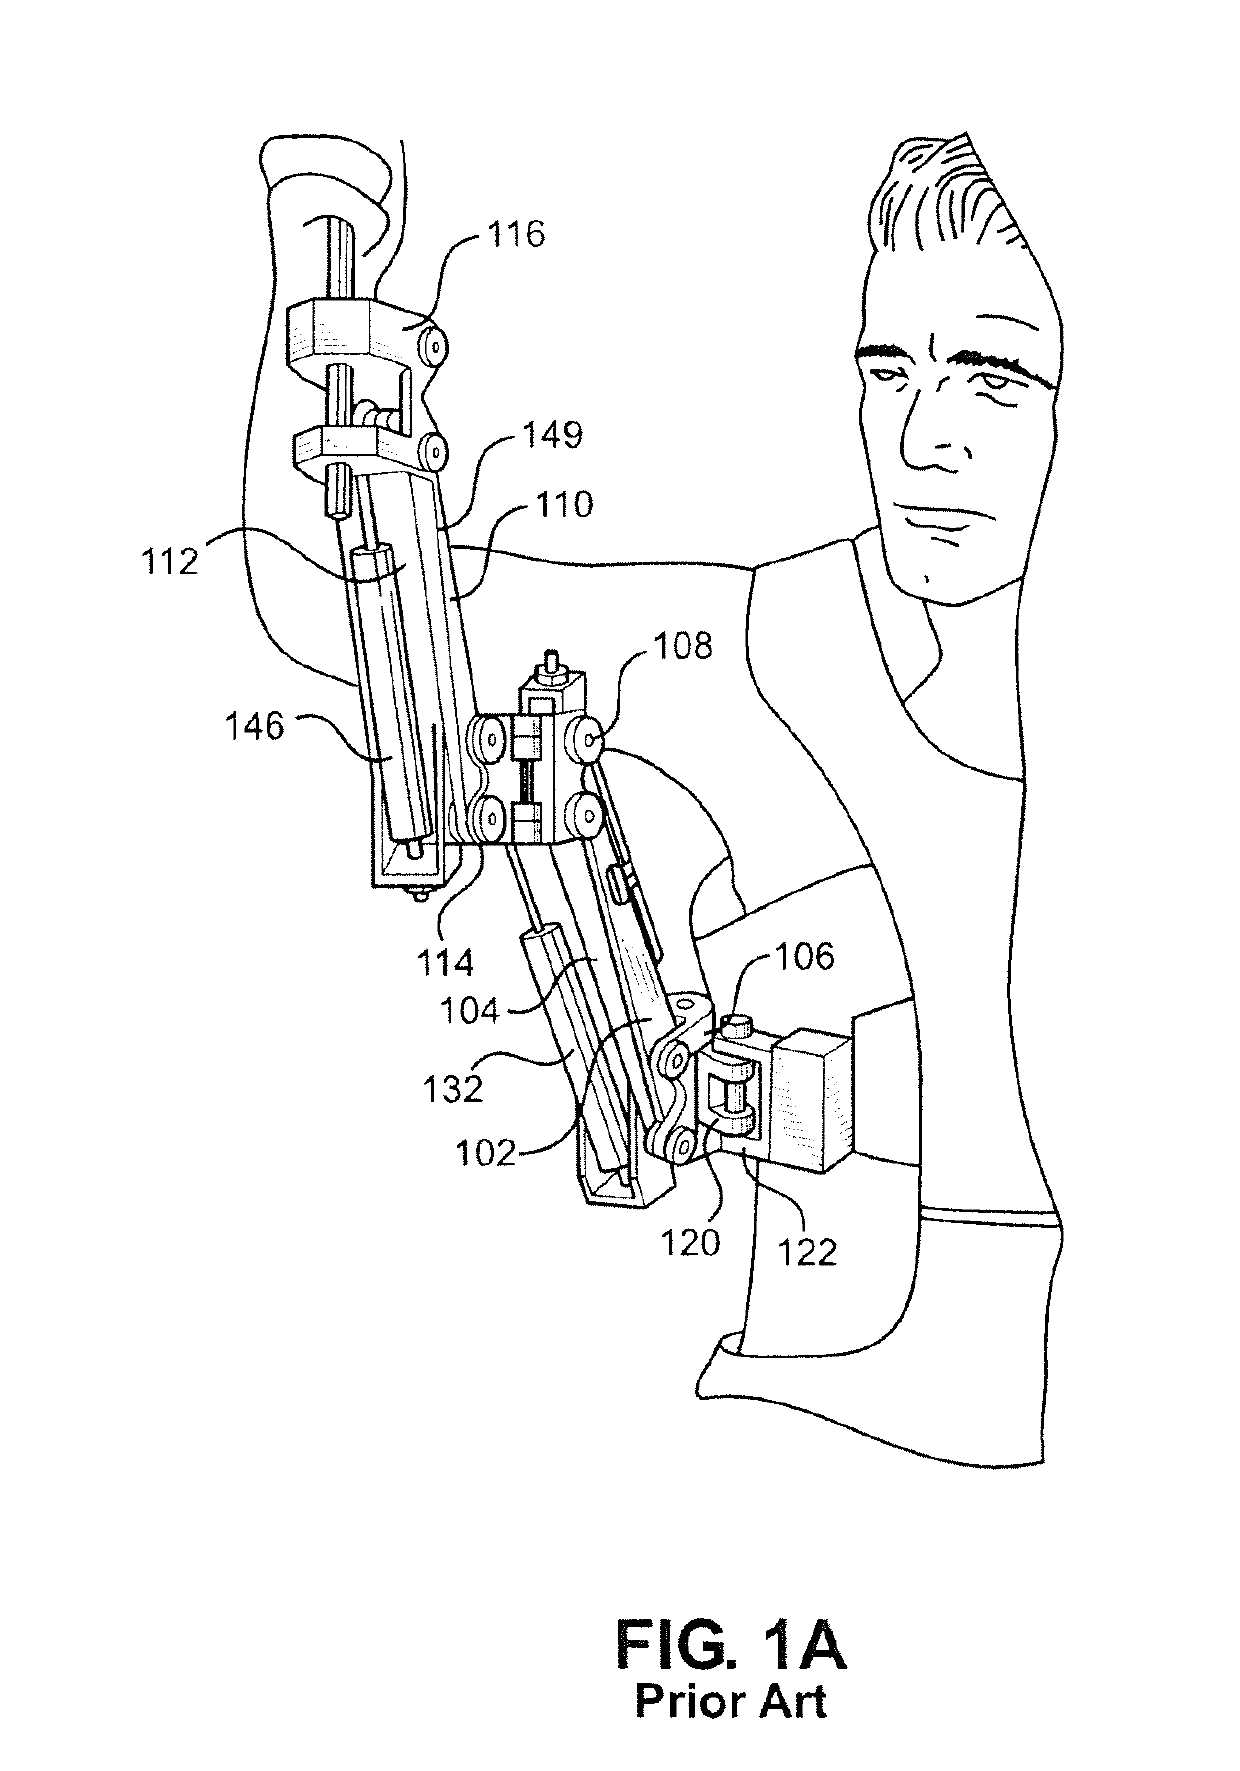 Control Mechanisms and Methods of Tool-Holding Arm for Exoskeletons